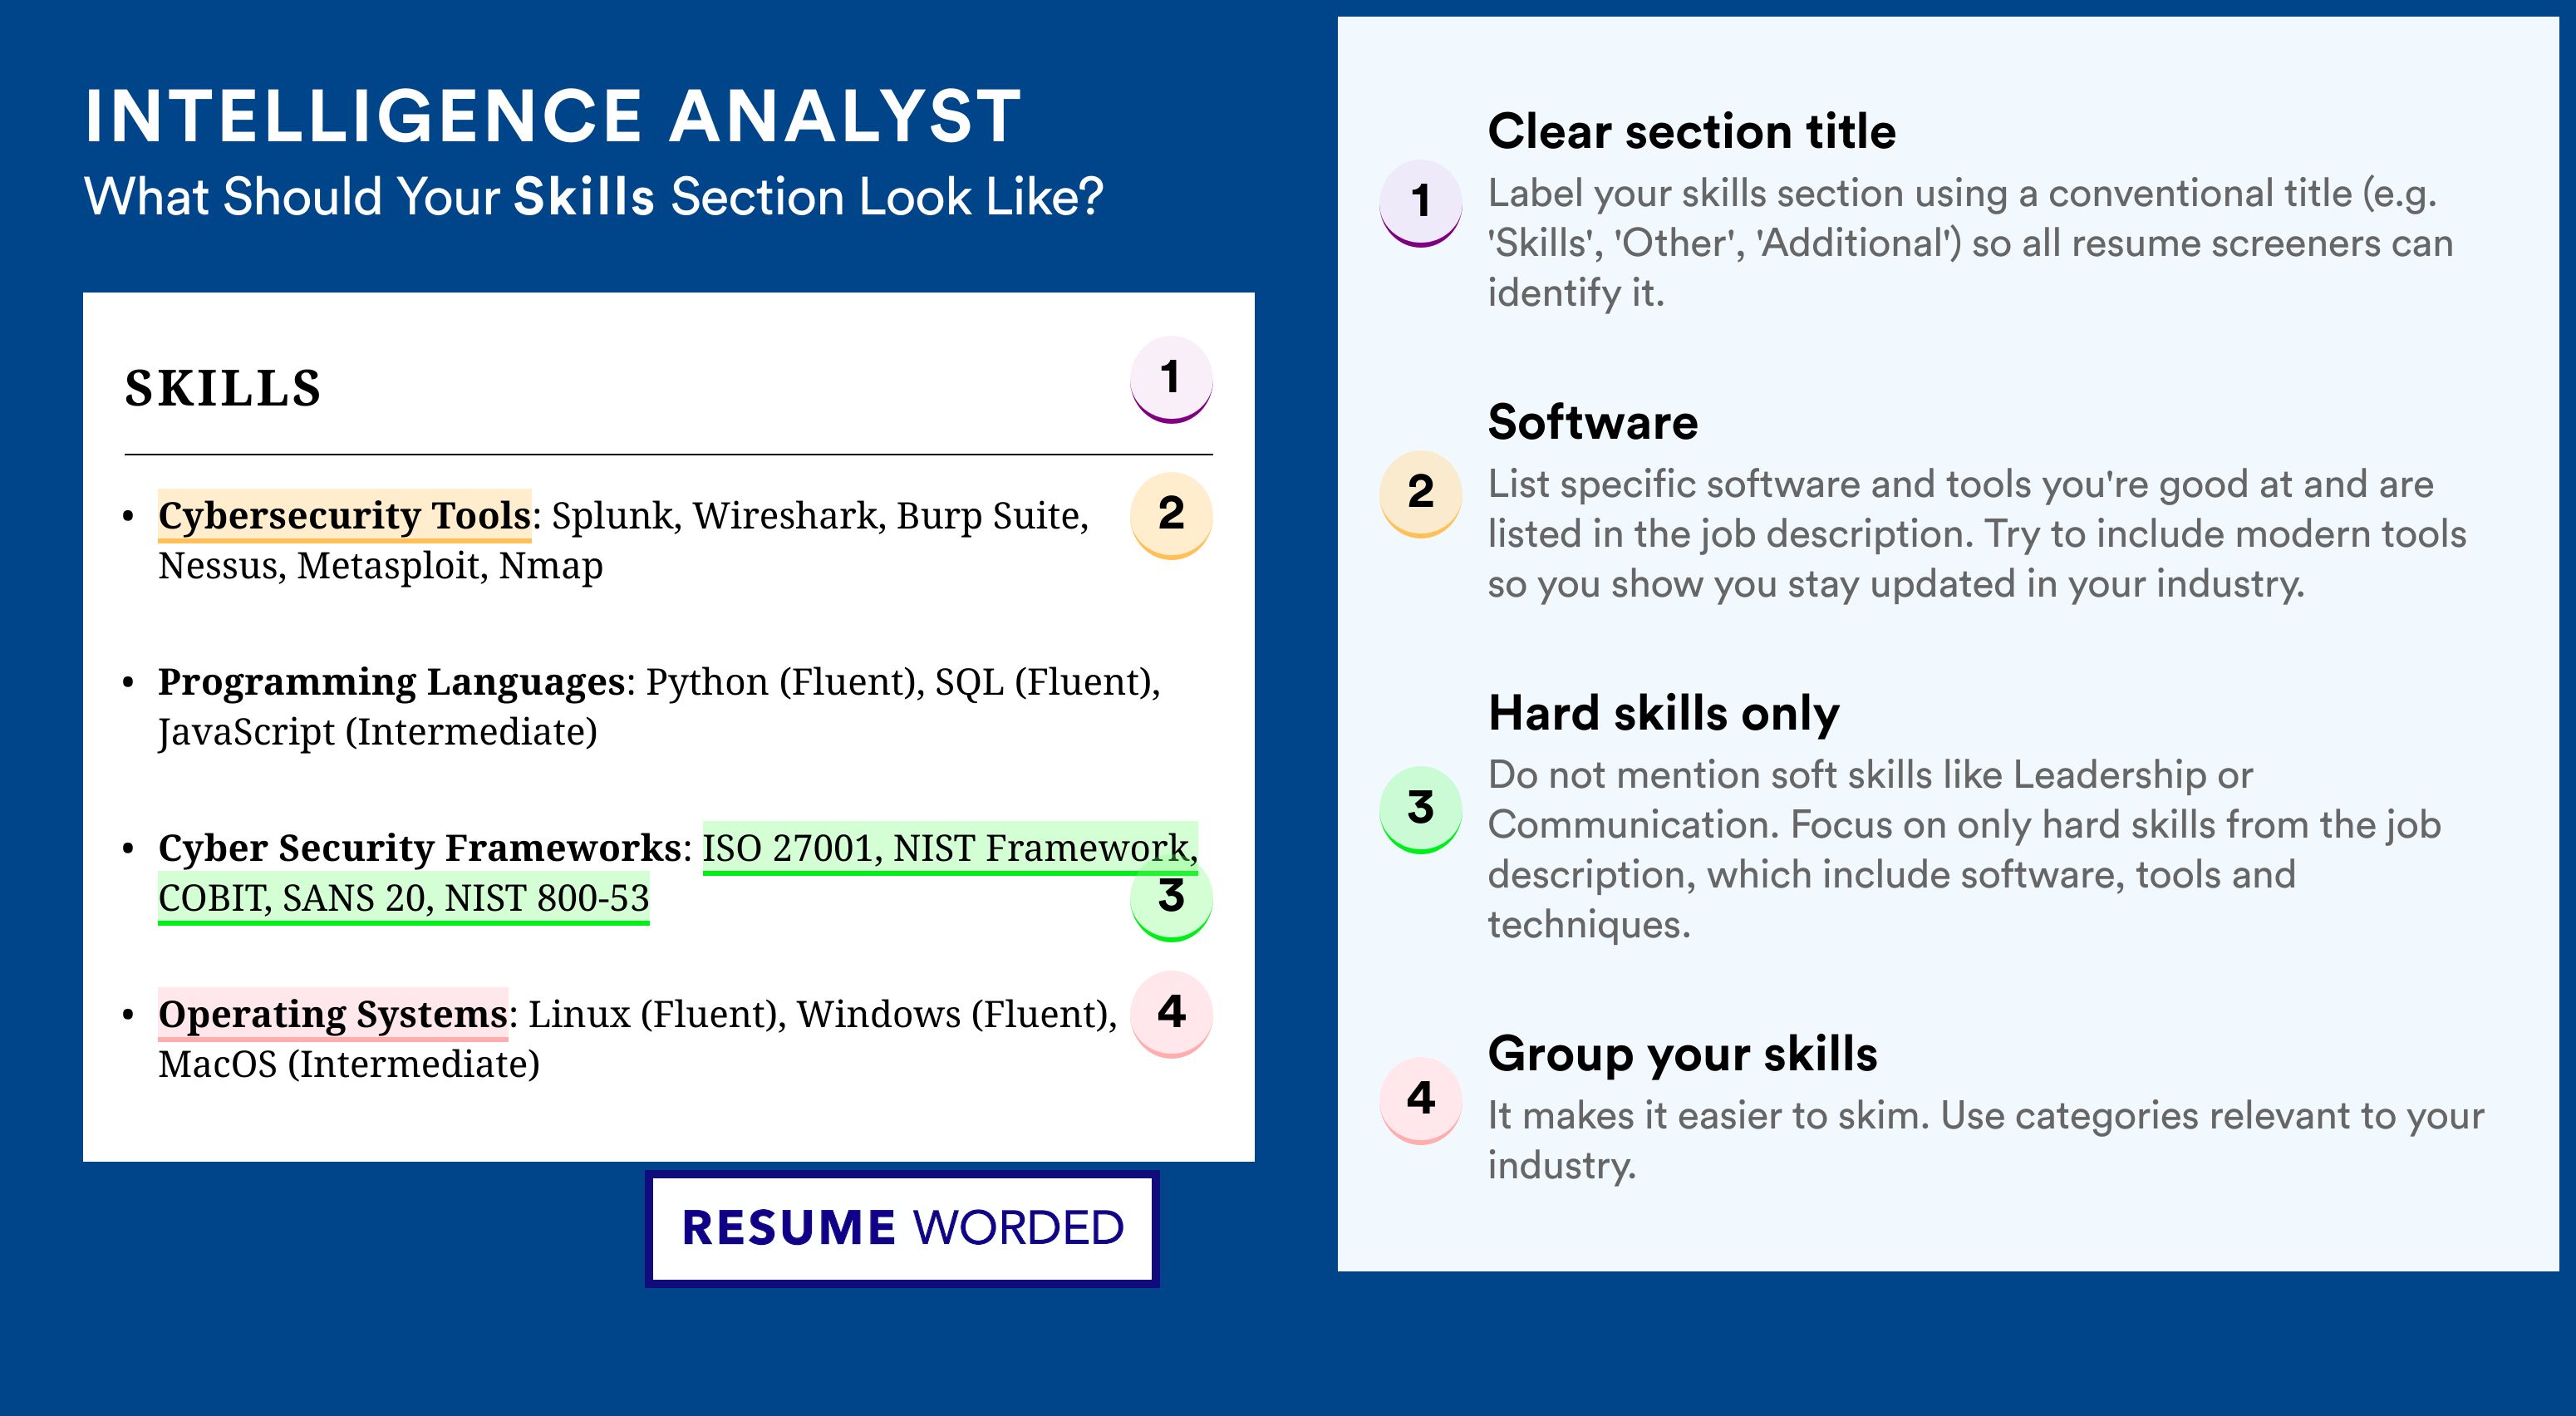 How To Write Your Skills Section - Intelligence Analyst Roles